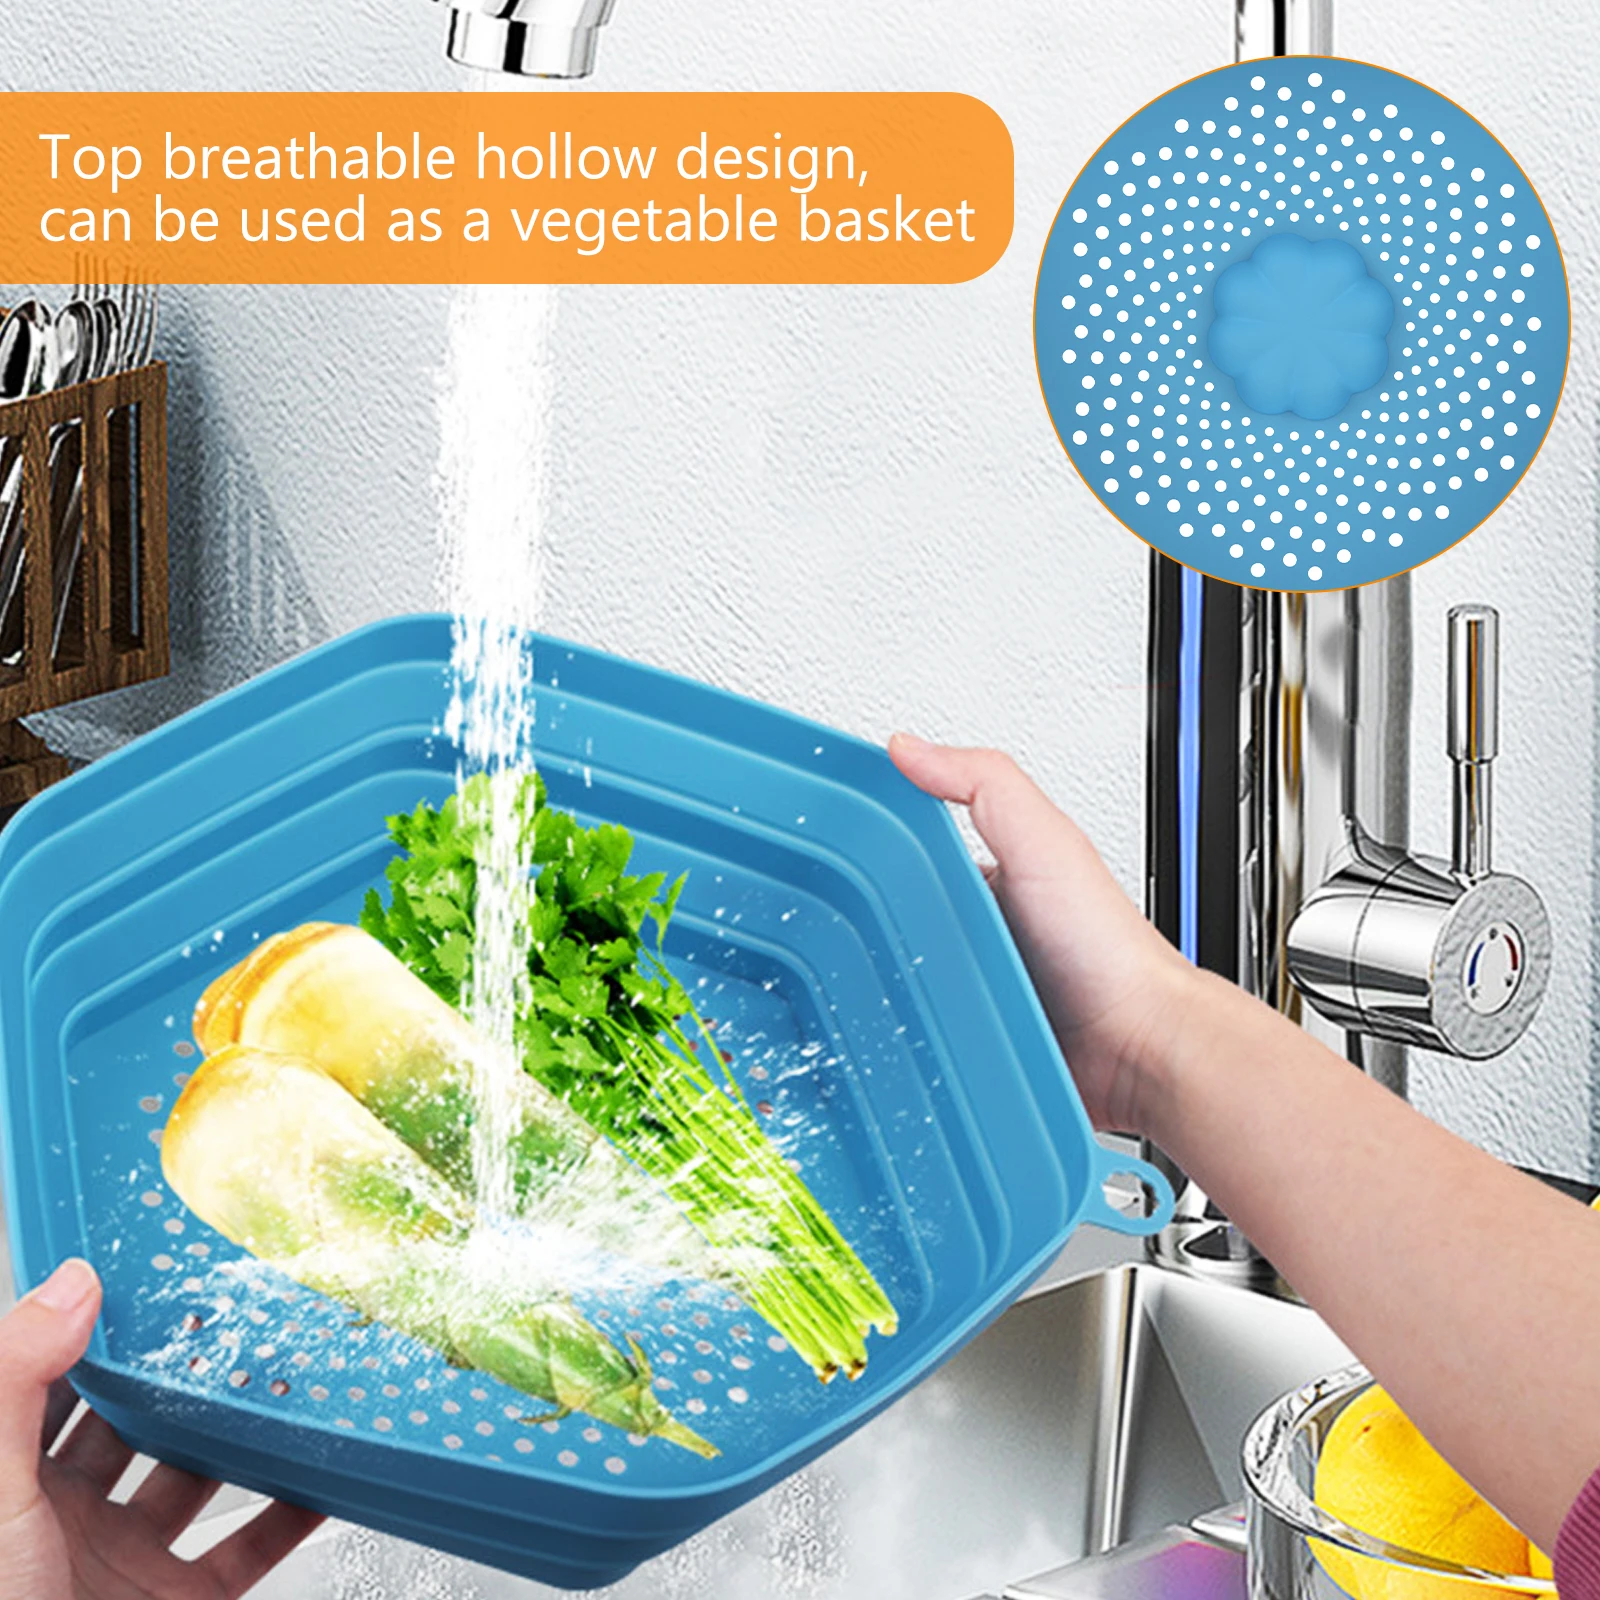 2 Collapsible Magnetic Silicone Microwave Cover Lid - 3-in-1, Anti-Splatter  Shield Guard, Moisture Lock Technology, Dishwasher Safe, Sticks To The